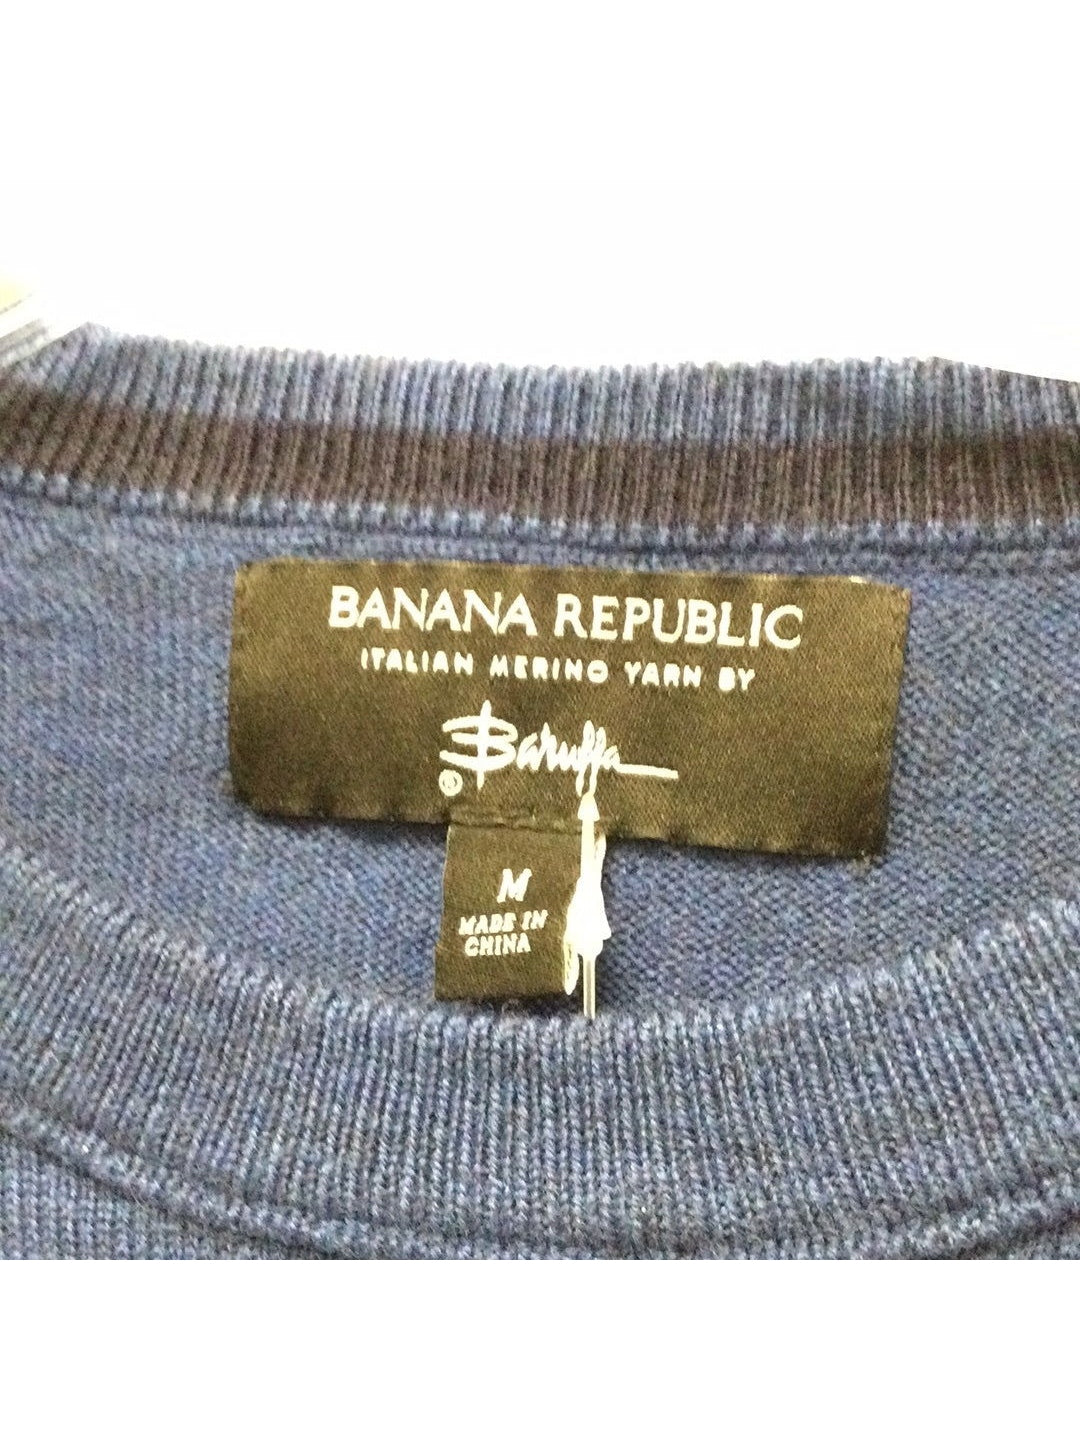 Banana Republic Women's Blue Sweater - The Kennedy Collective Thrift - 